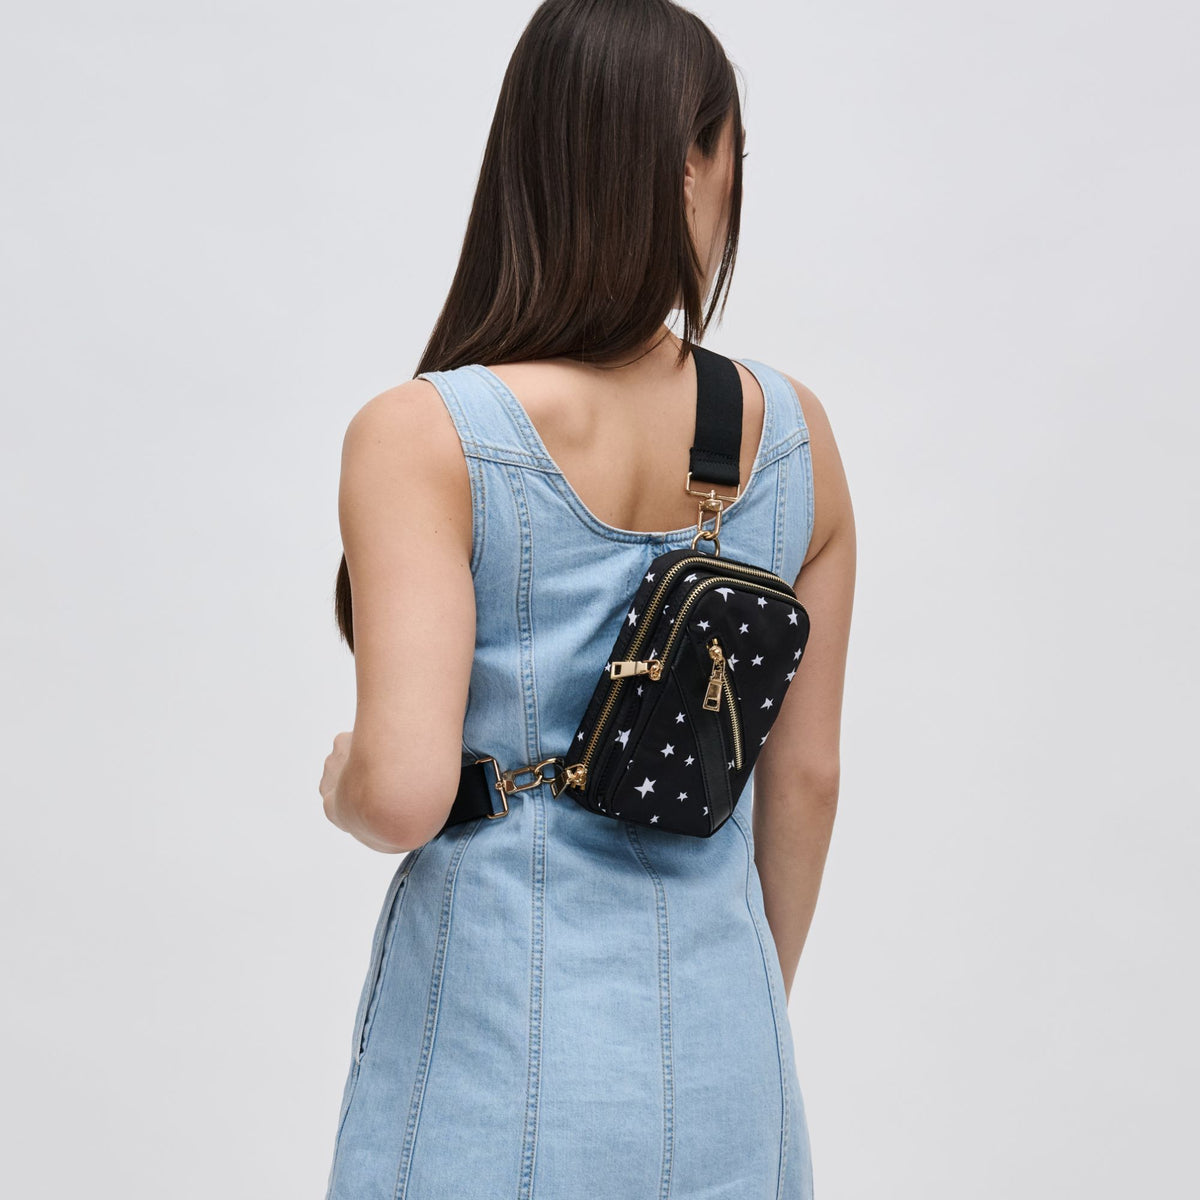 Woman wearing Black Star Sol and Selene Accolade Sling Backpack 841764107273 View 3 | Black Star